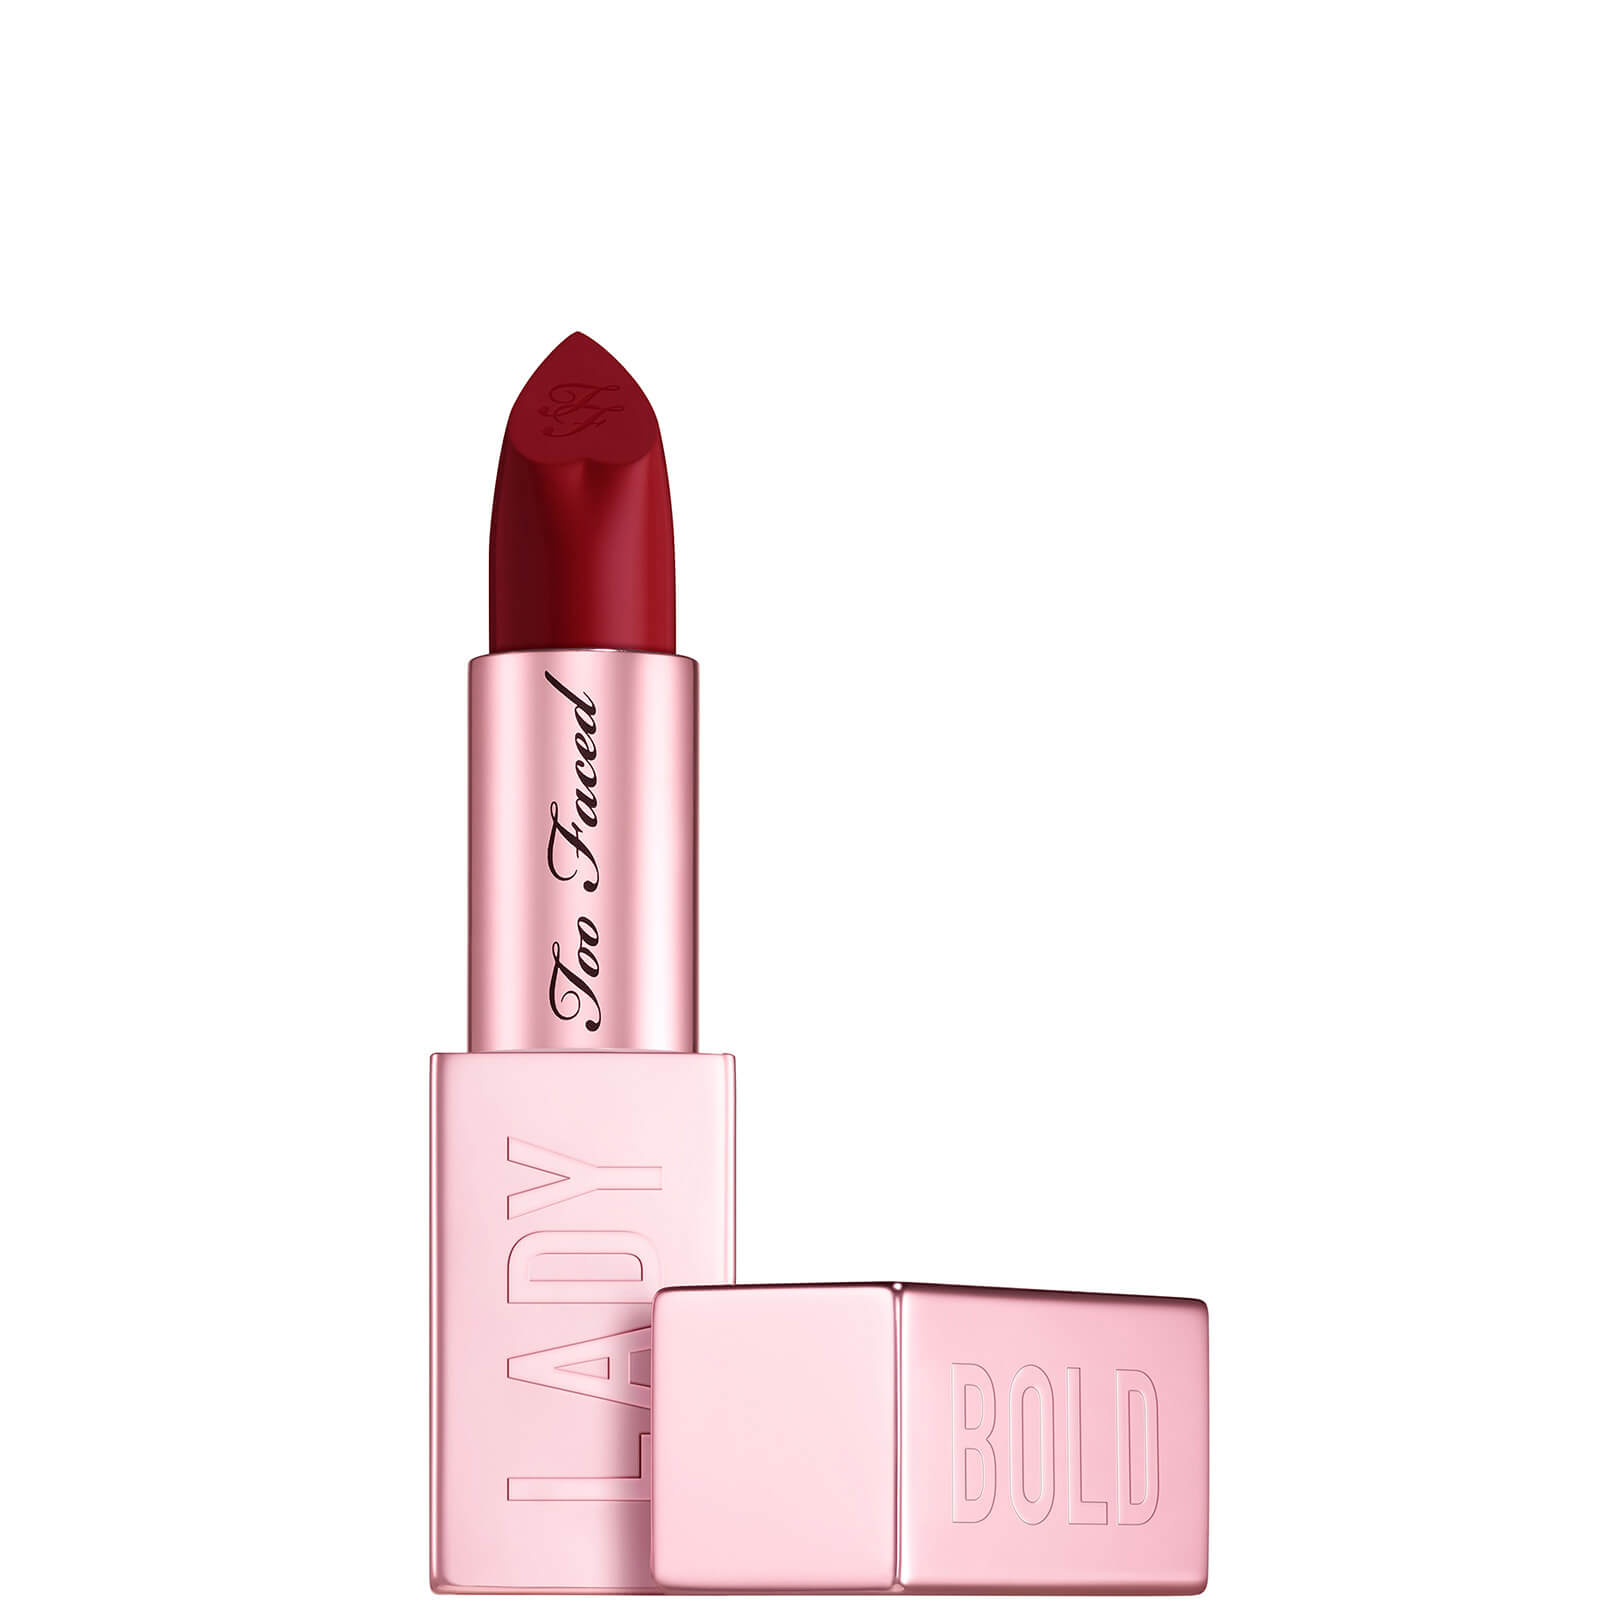 Too Faced Lady Bold Em-Power Pigment Lipstick 4g (Various Shades) - Take Over